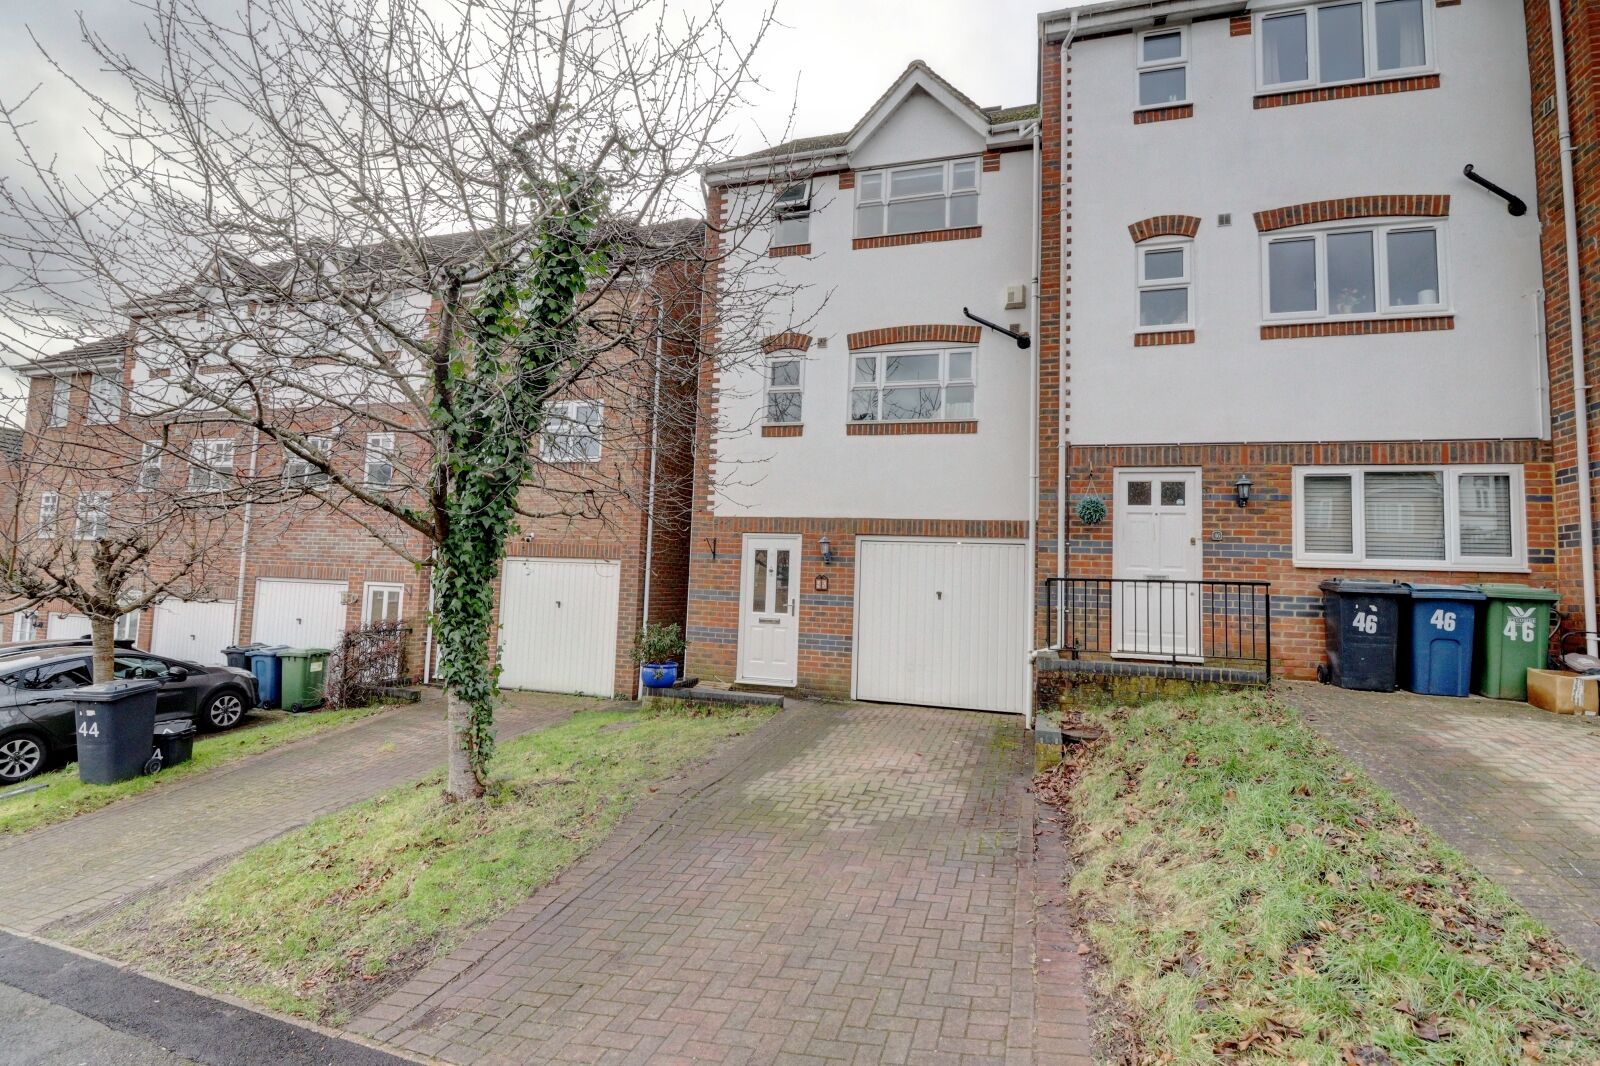 3 bedroom end terraced house for sale Wheelers Park, High Wycombe, HP13, main image